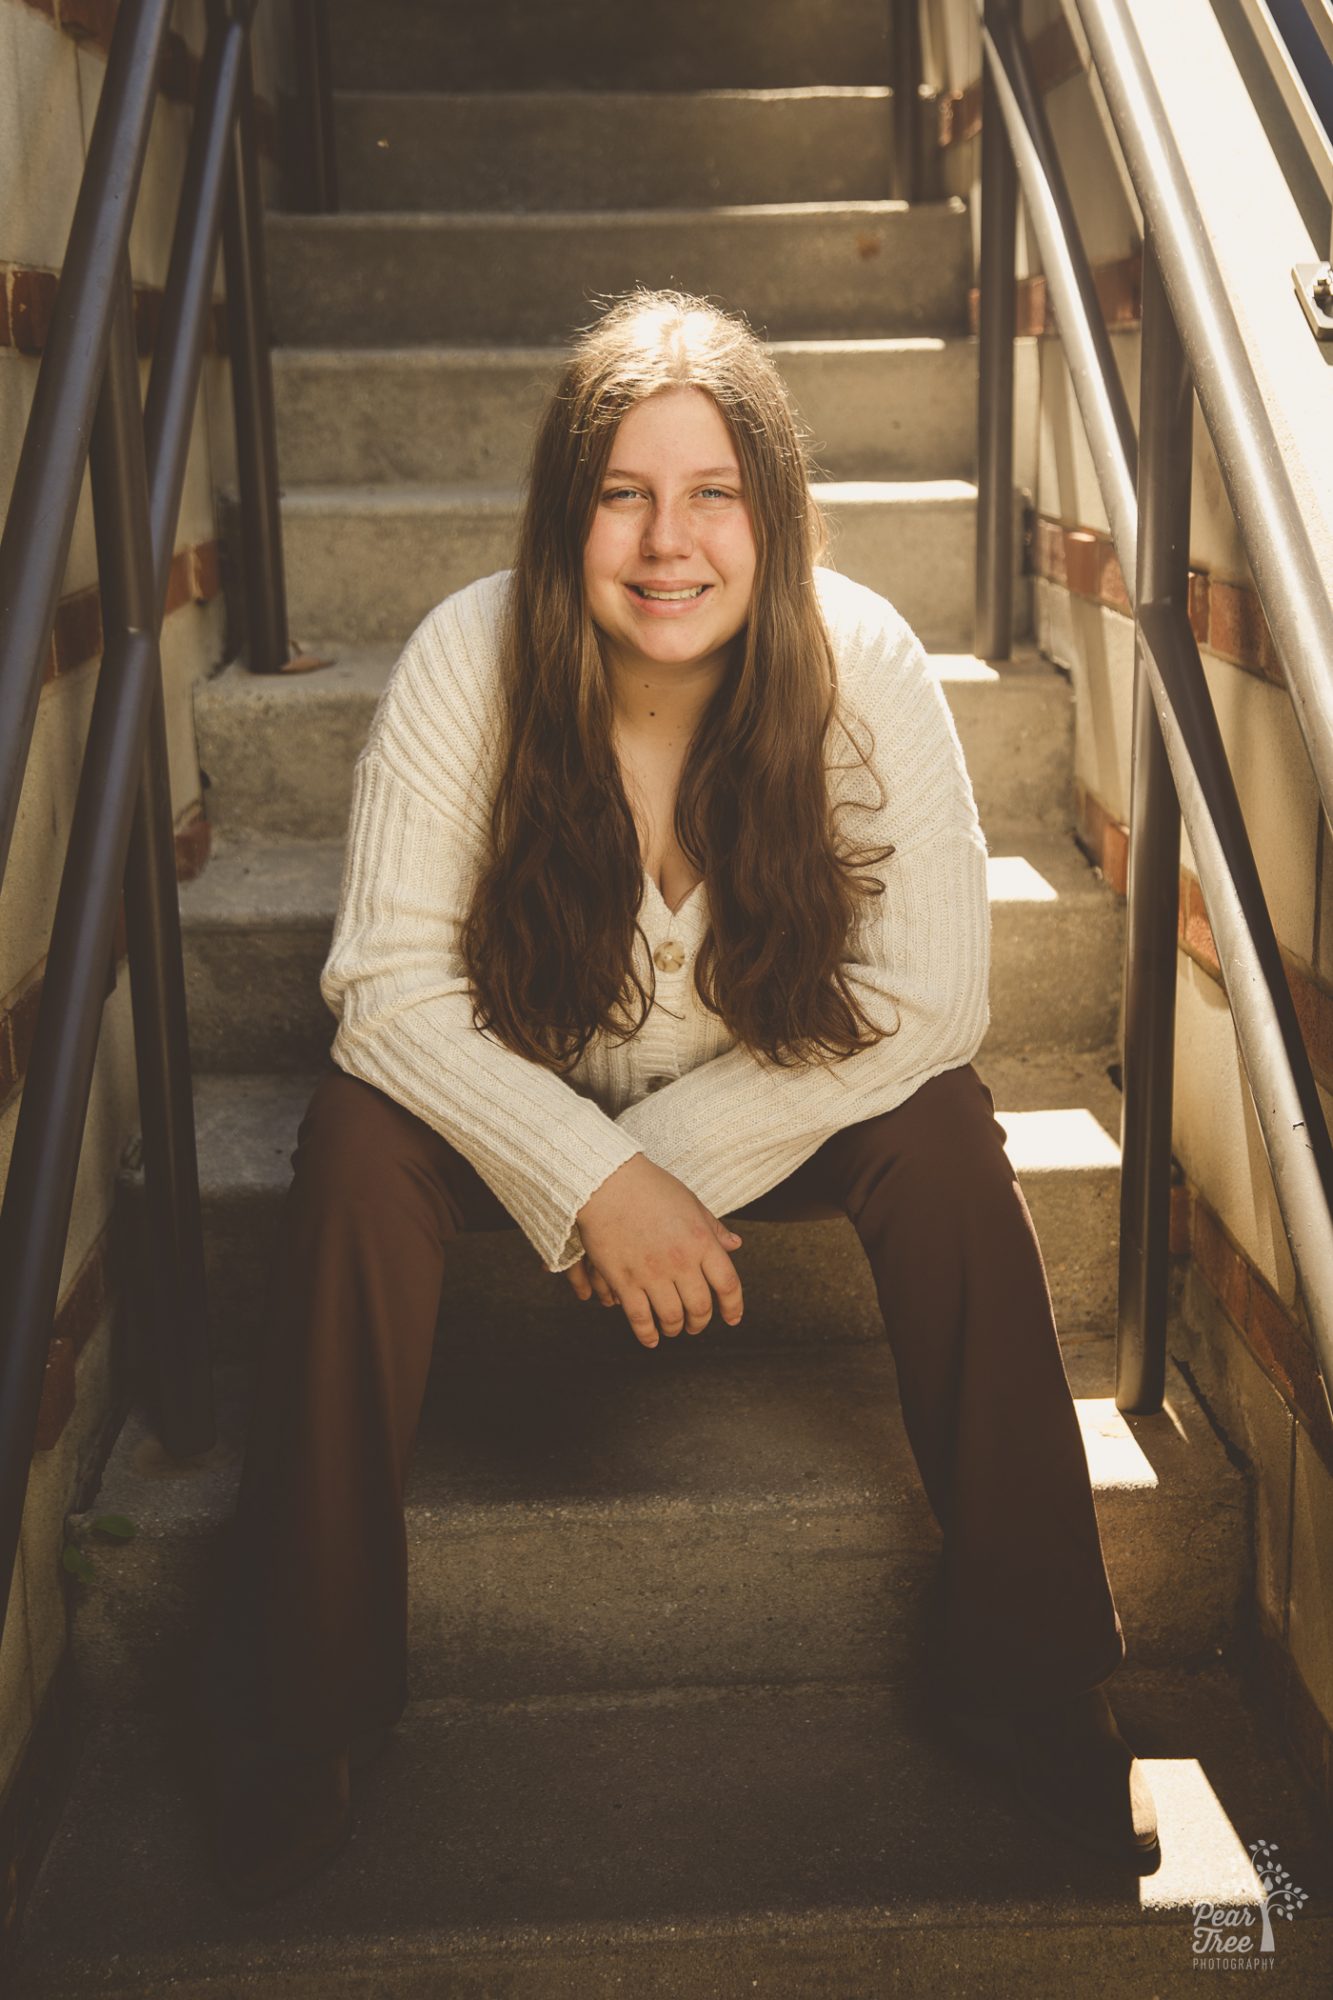 Woodstock high school senior girl sitting on steps in Chattanooga and smiling